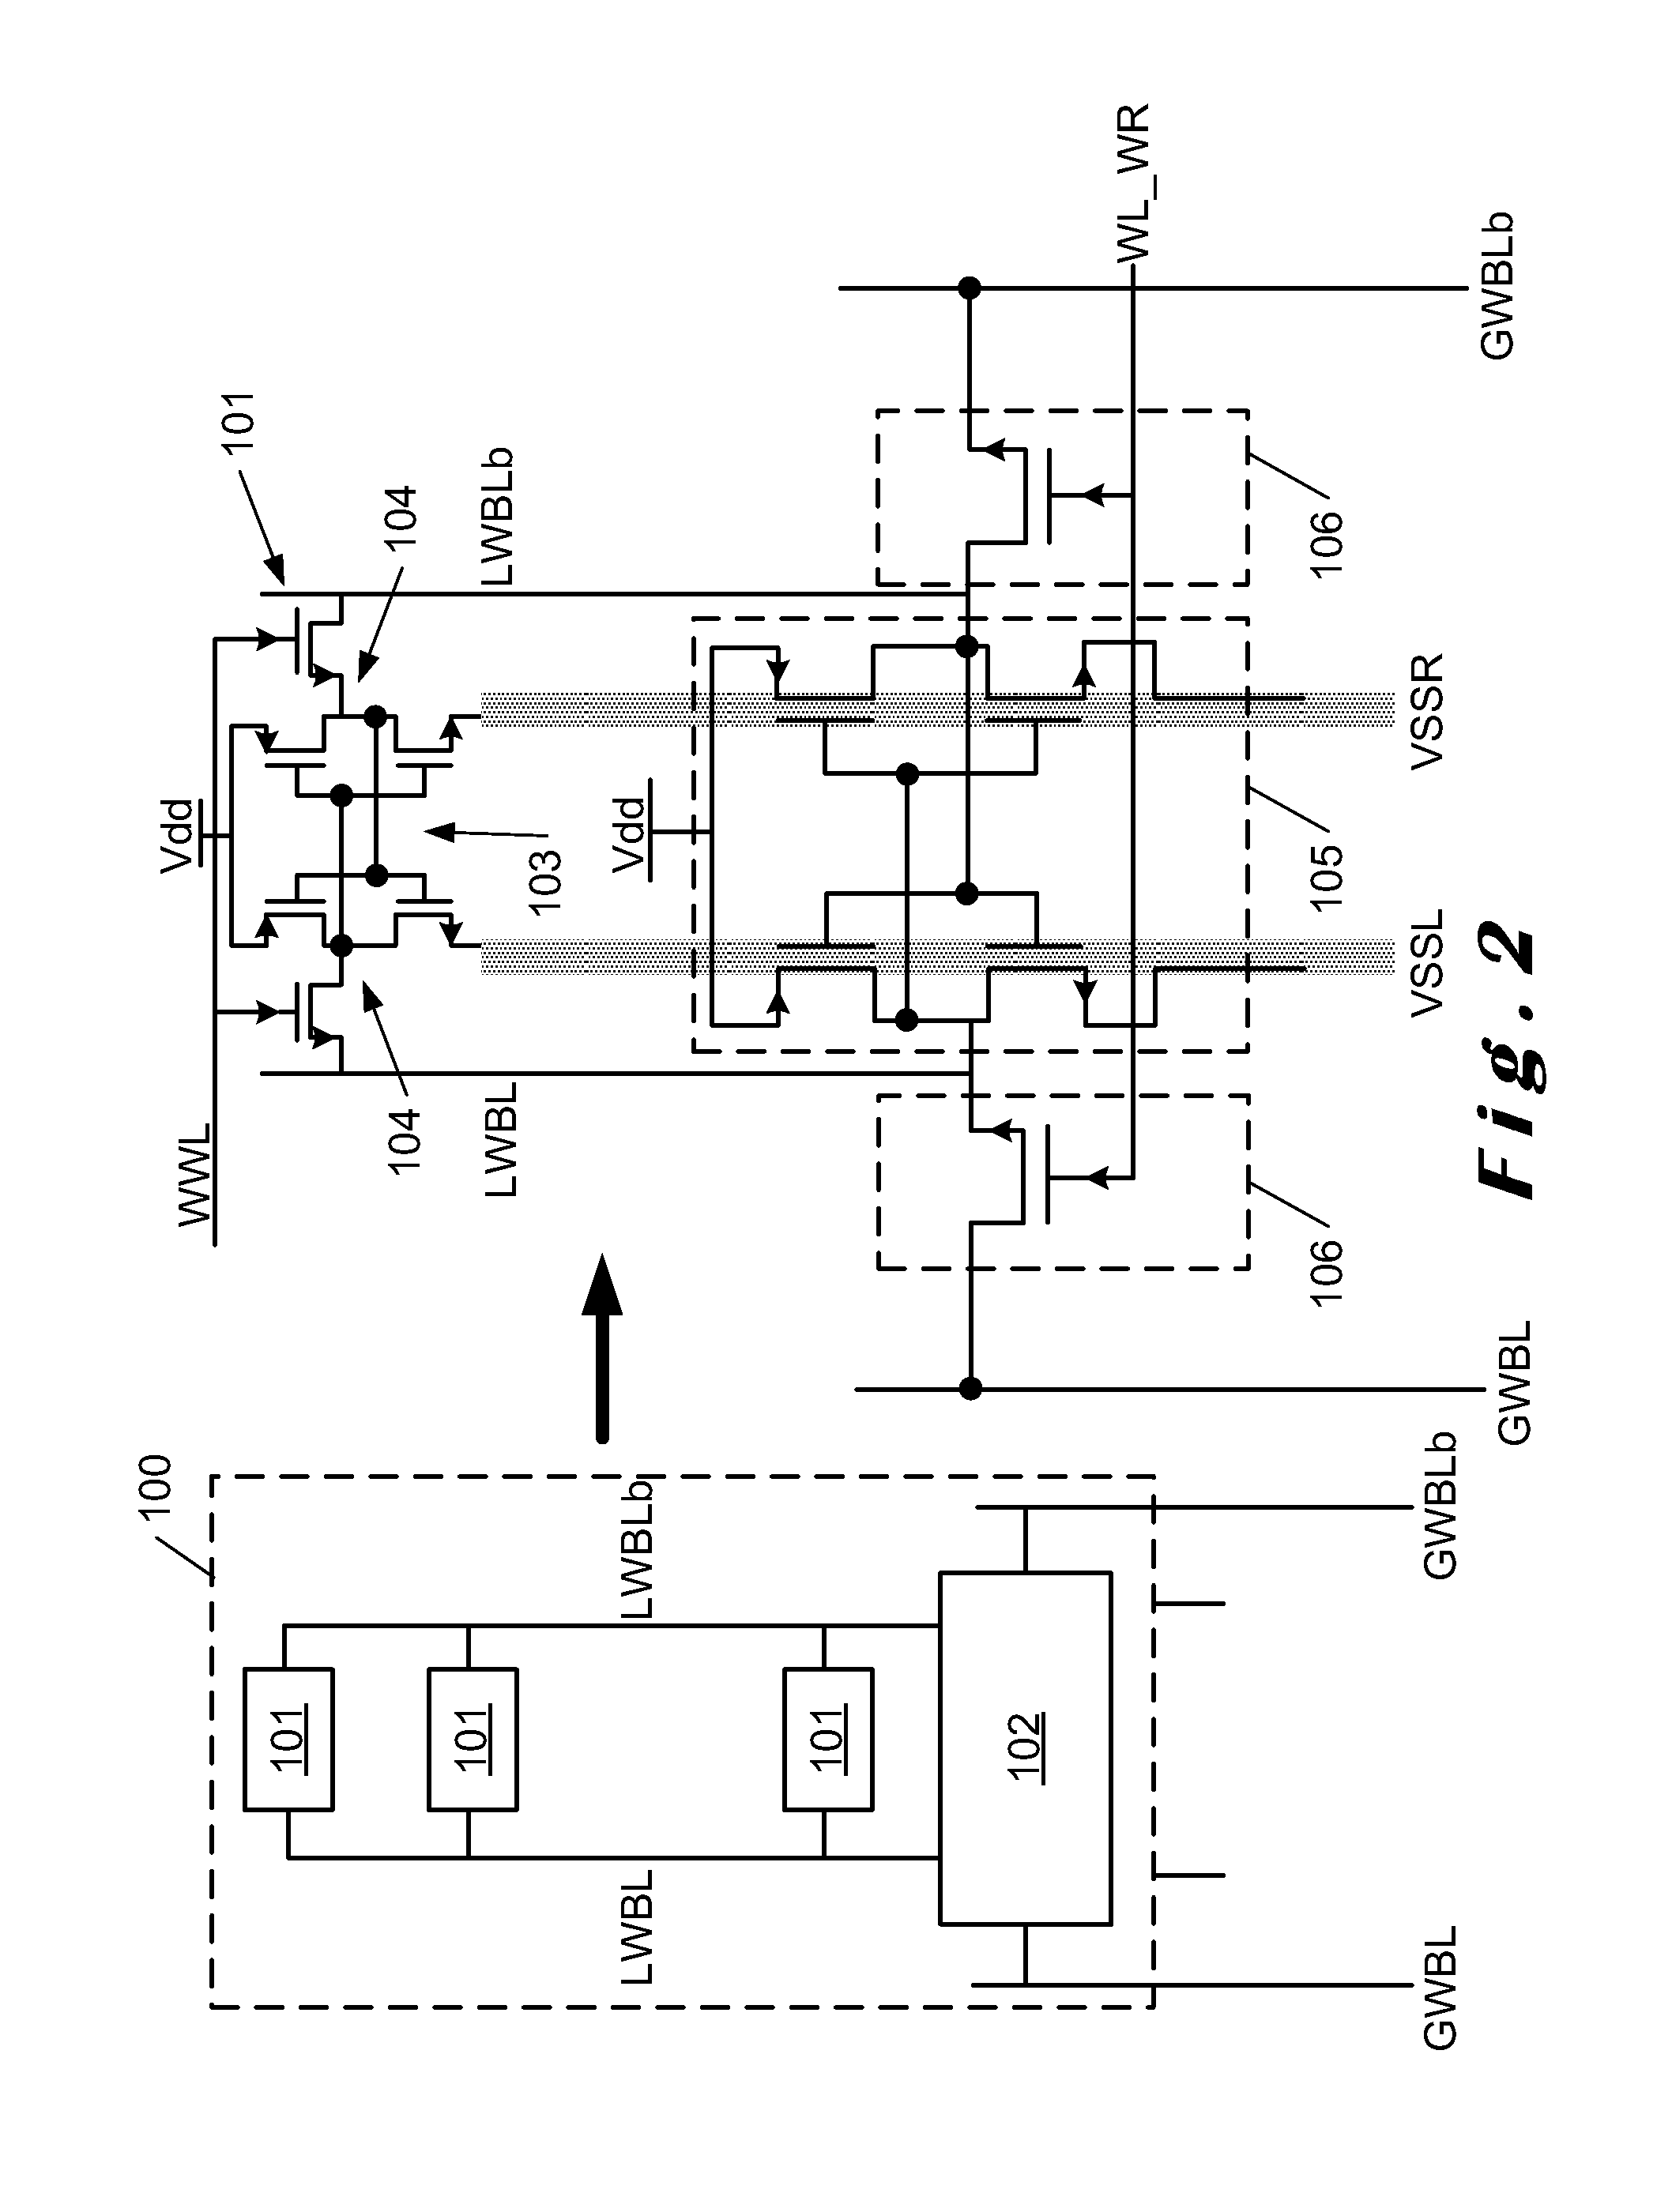 Local write and read assist circuitry for memory device